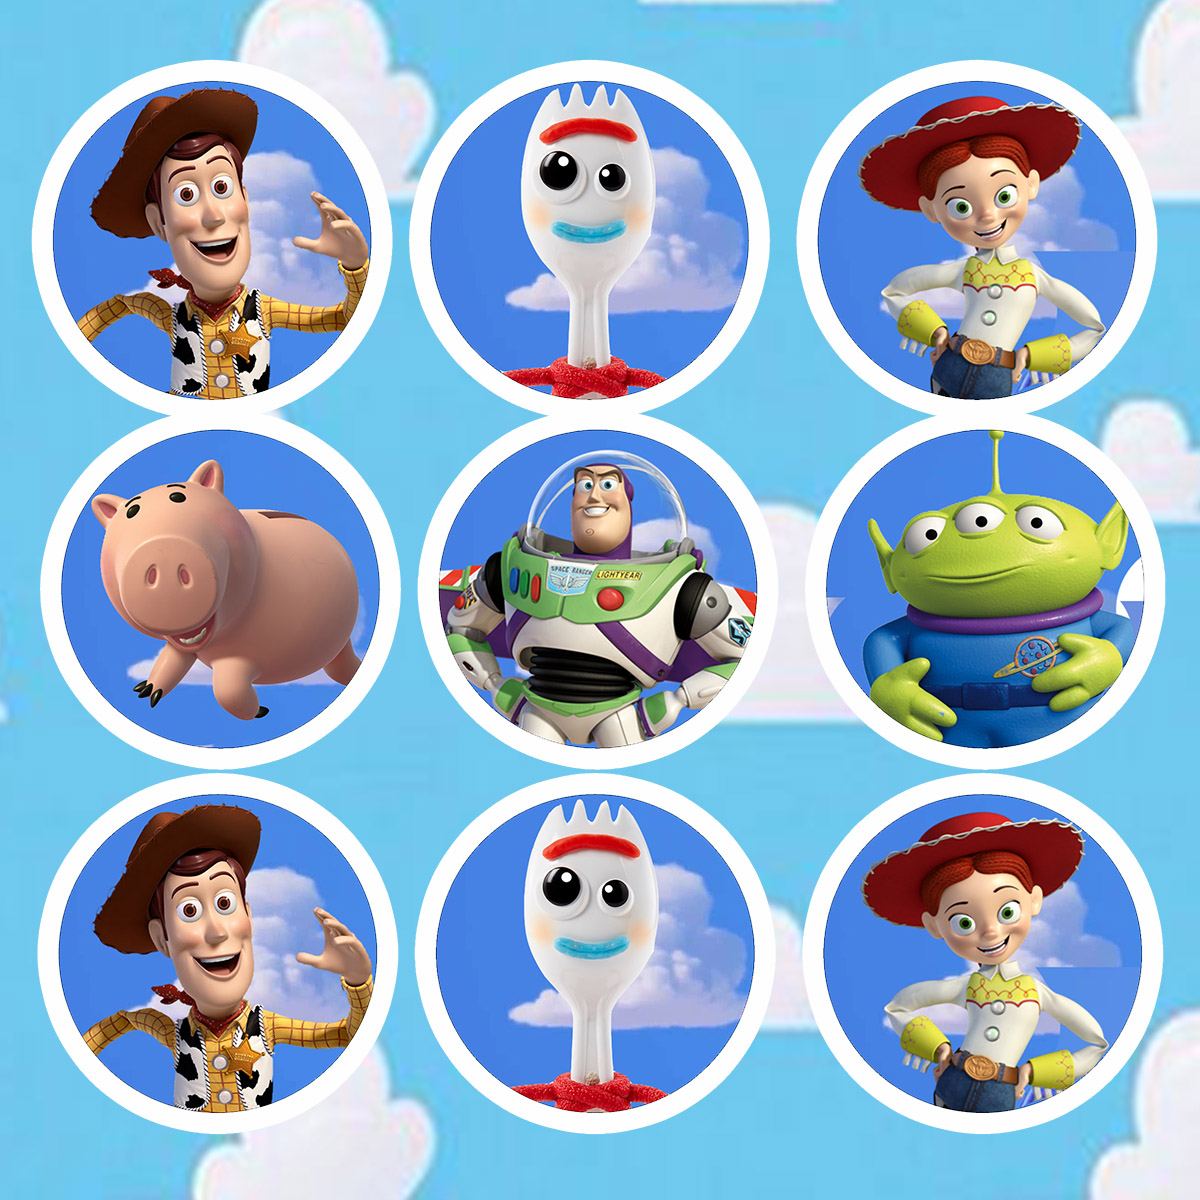 Daisy Celebrates Toy Story 4 Birthday Party Printable Files - daisy celebrates roblox birthday party printable files in